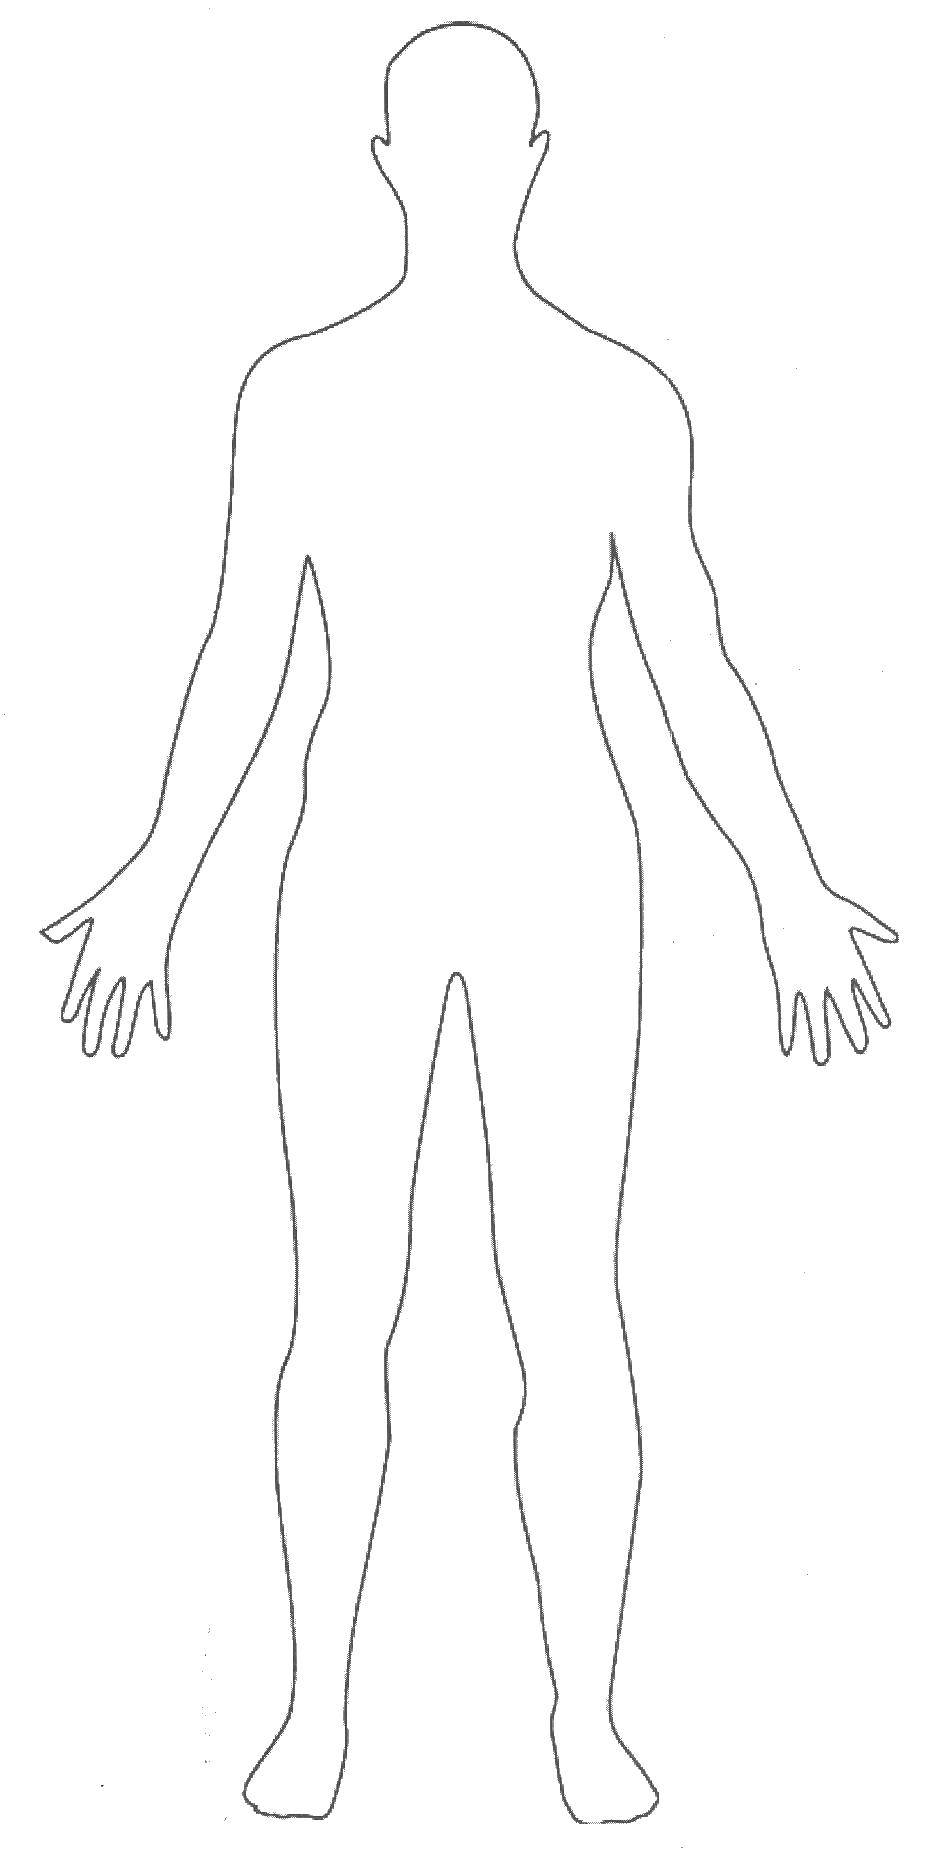 Coloring Contour men. Category The contour of people. Tags:  outline , man, hands, feet.